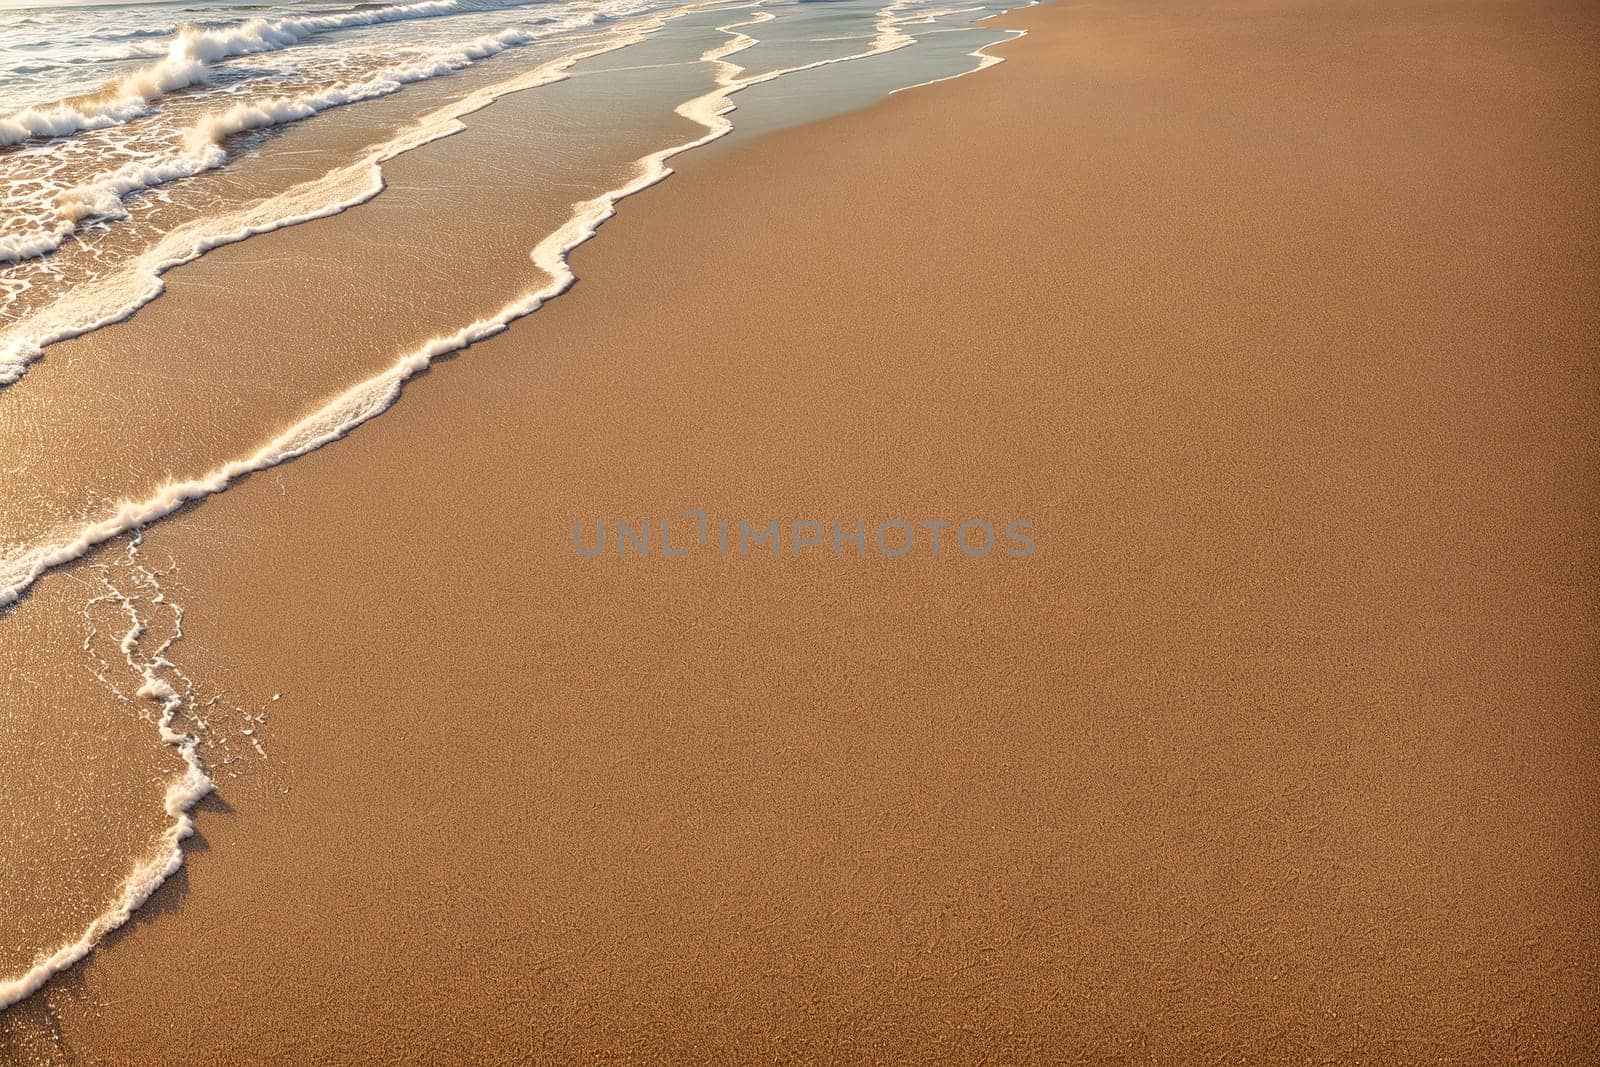 The image is a sandy beach with waves crashing against the shore.